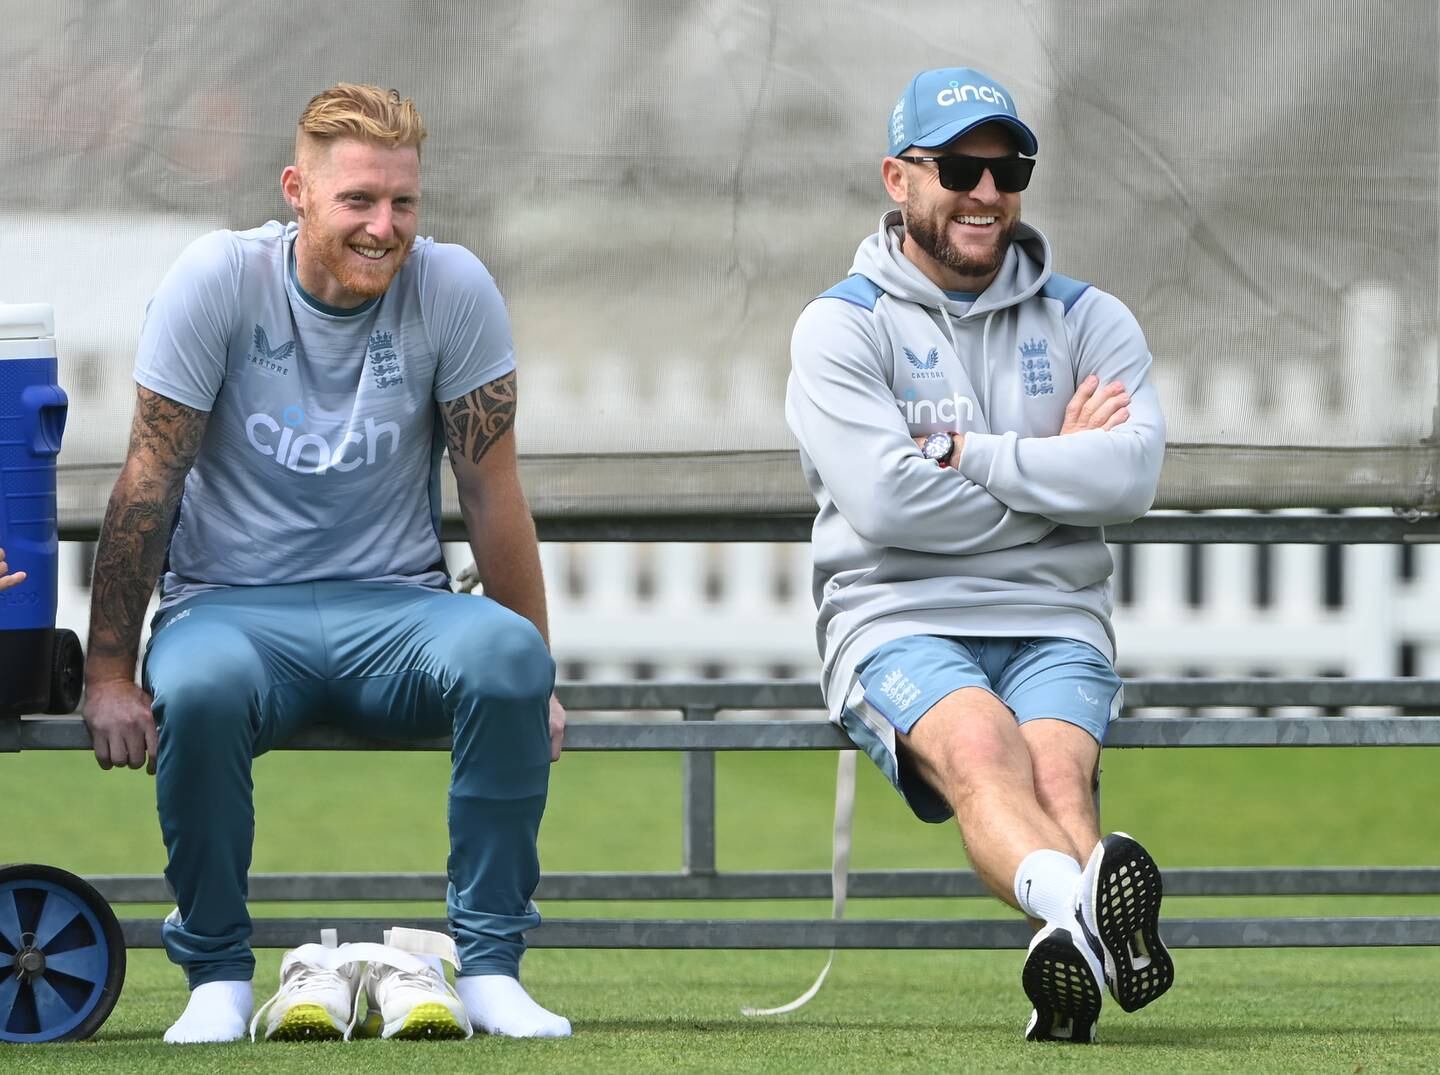 Captain Ben Stokes and coach Brendon McCullum have led England to wins in their first three Tests since taking charge of team. Getty